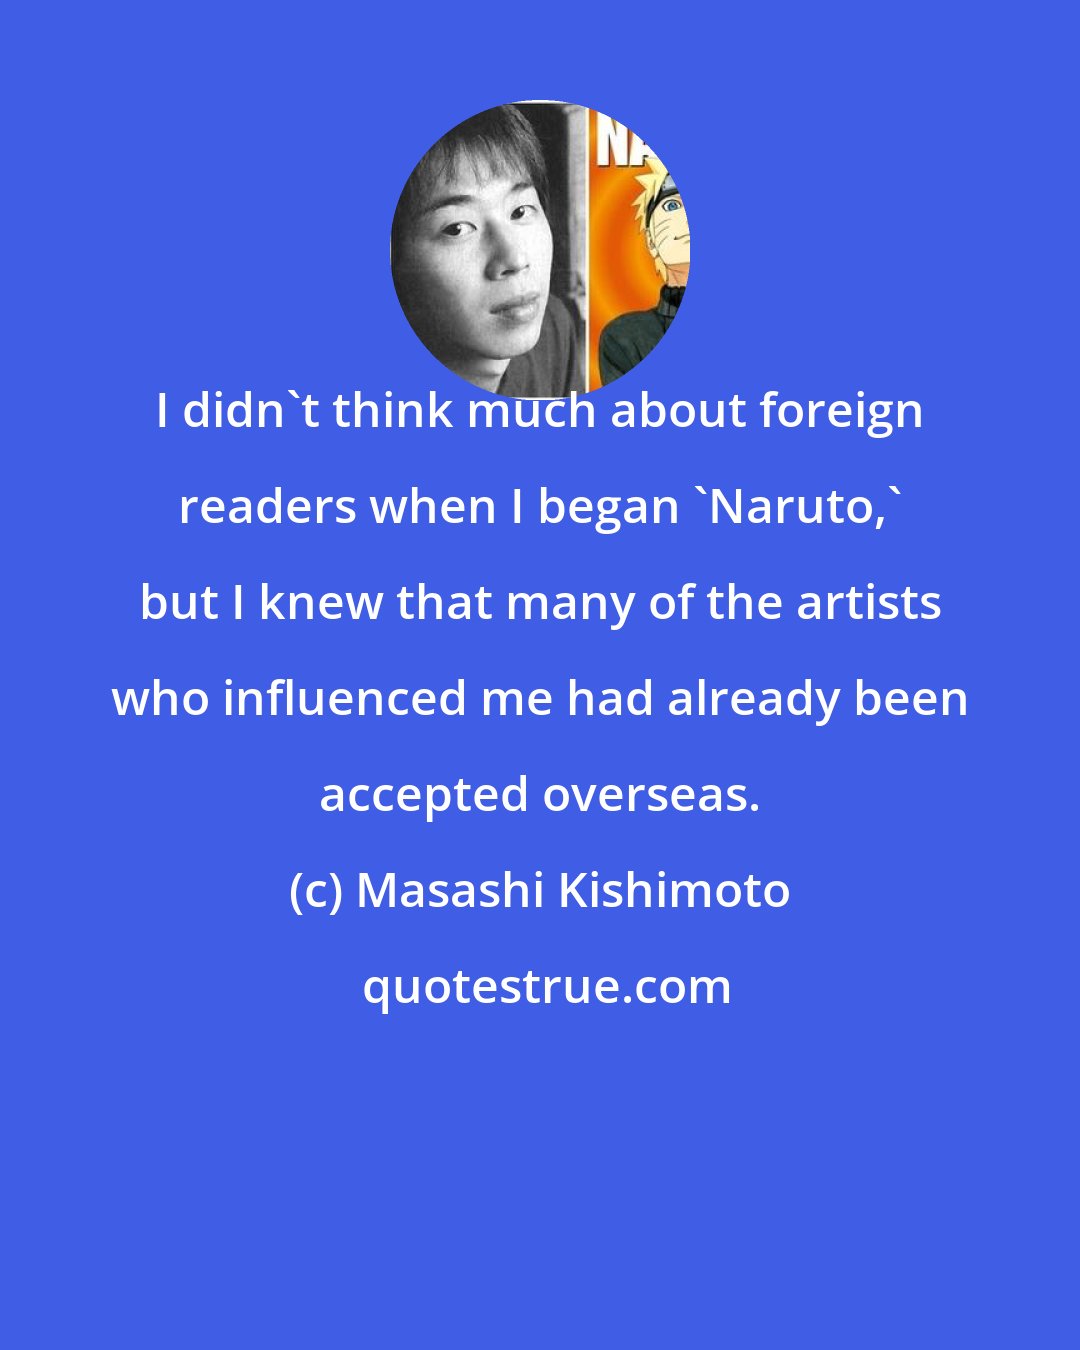 Masashi Kishimoto: I didn't think much about foreign readers when I began 'Naruto,' but I knew that many of the artists who influenced me had already been accepted overseas.